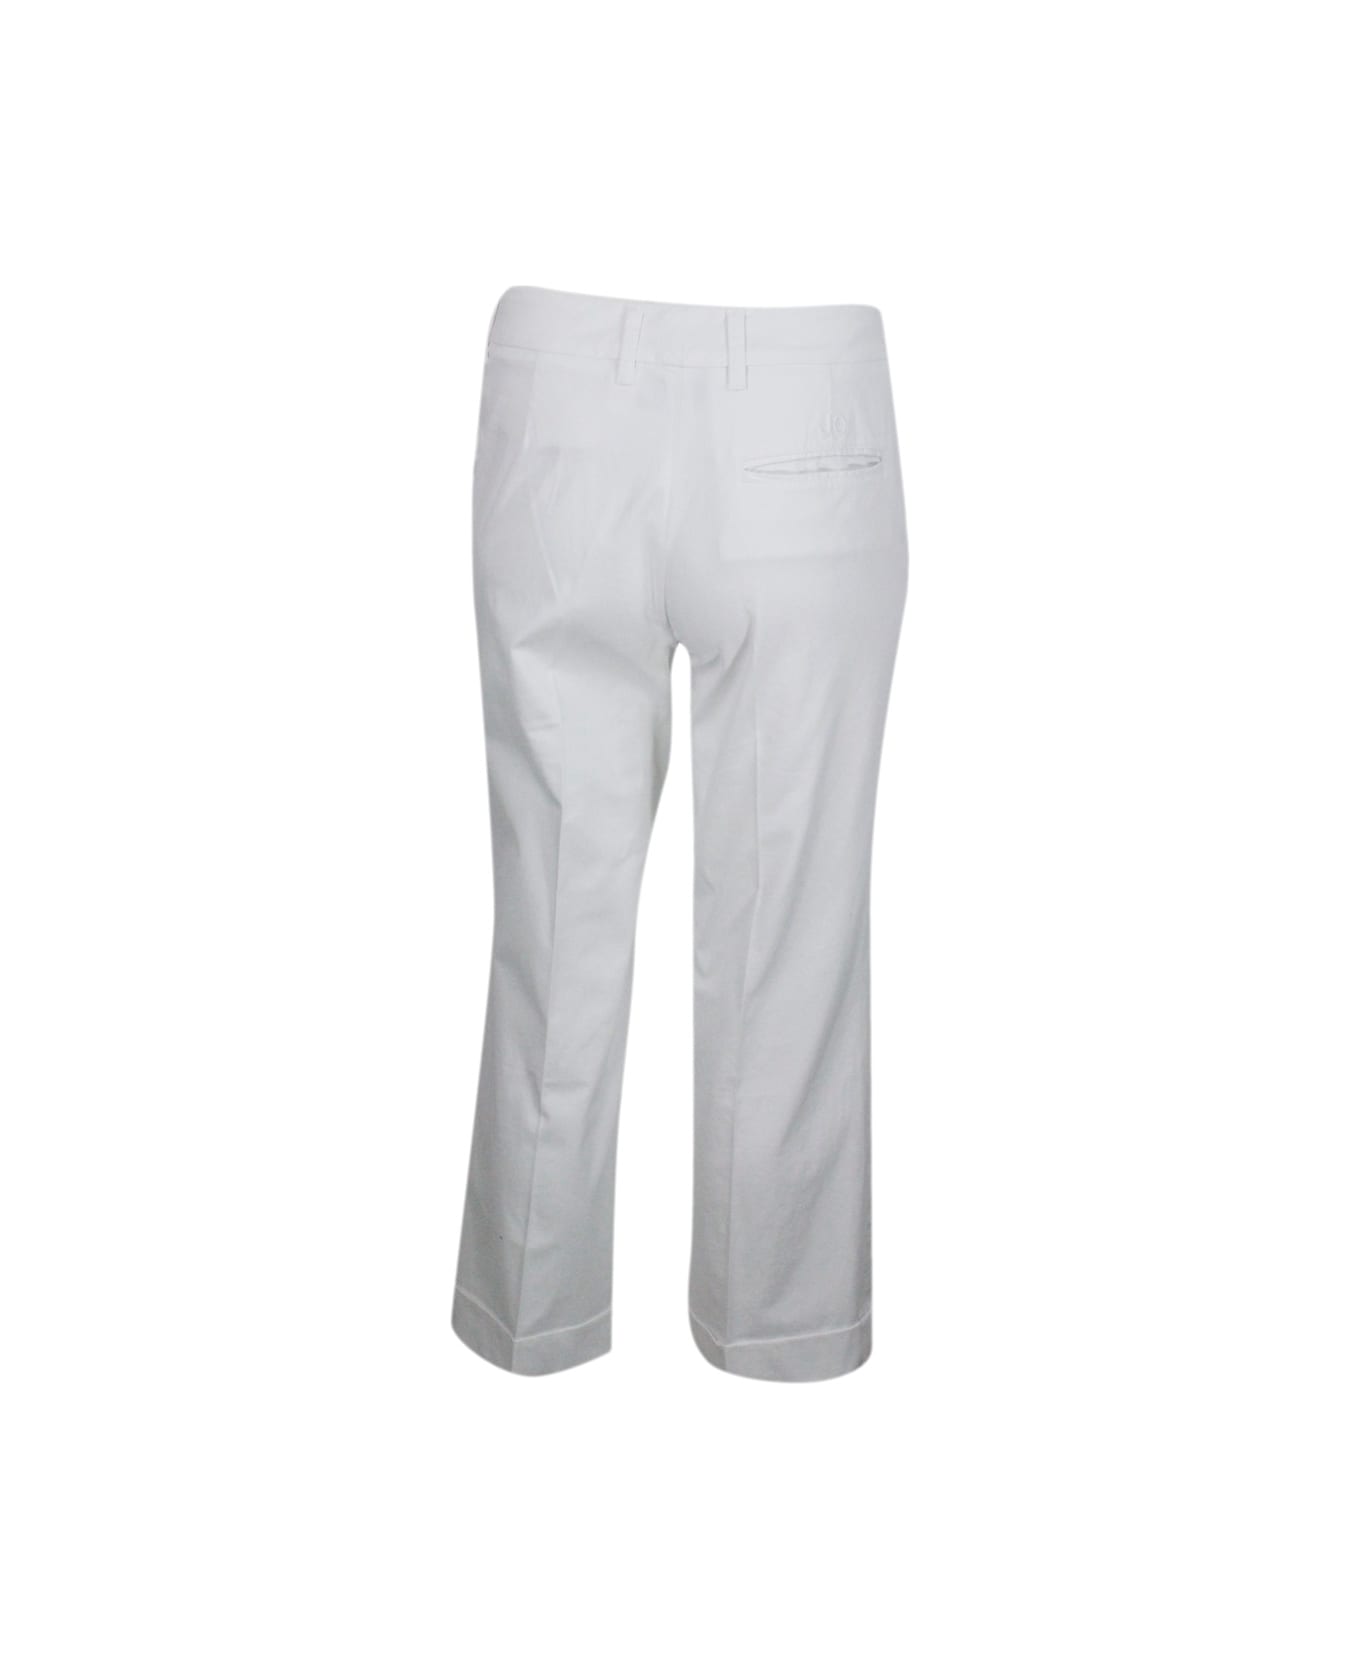 Jacob Cohen Luxury Edition Selena Cropped Trousers In Soft Stretch Cotton With Chinos America Pockets With Zip Closure And Small Logo Above The Back Pocket - White ボトムス